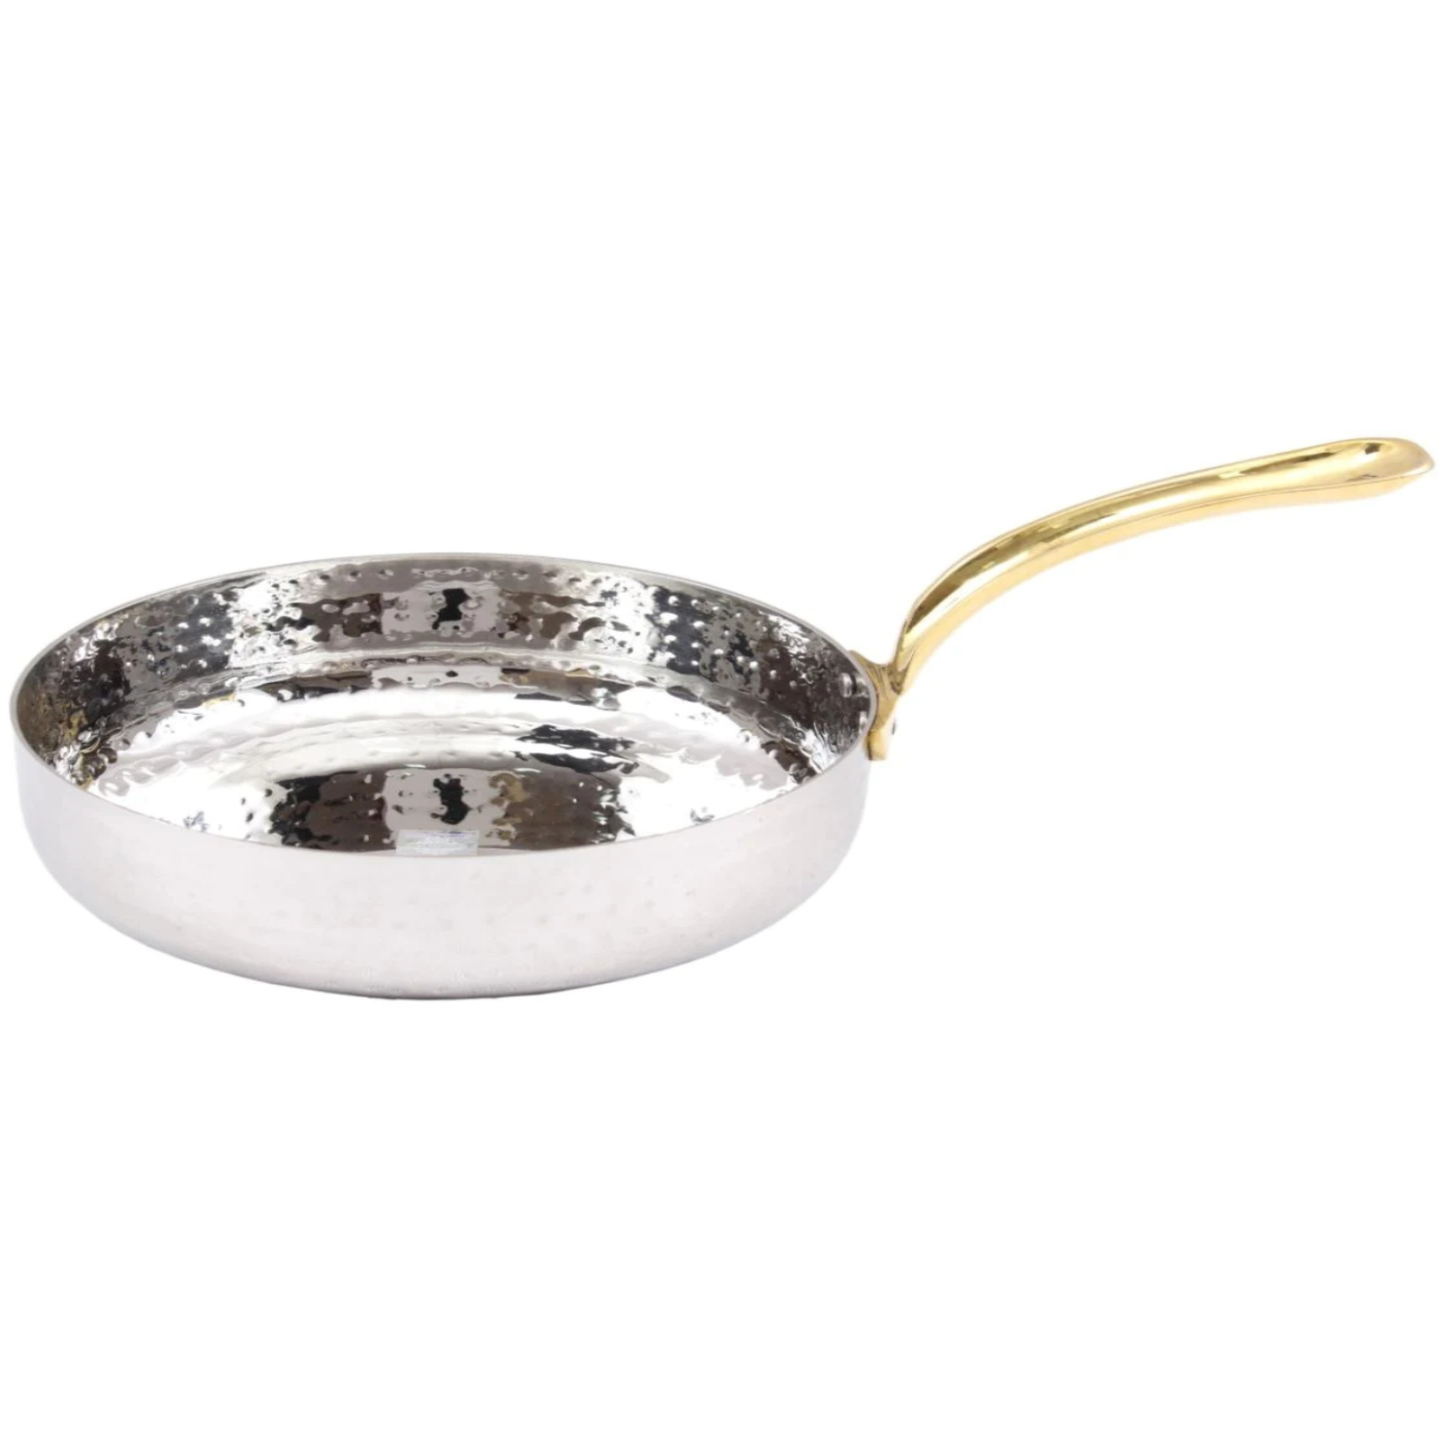 7.25" Stainless Steel Hammered Mini Fry Pan with Brass Handle